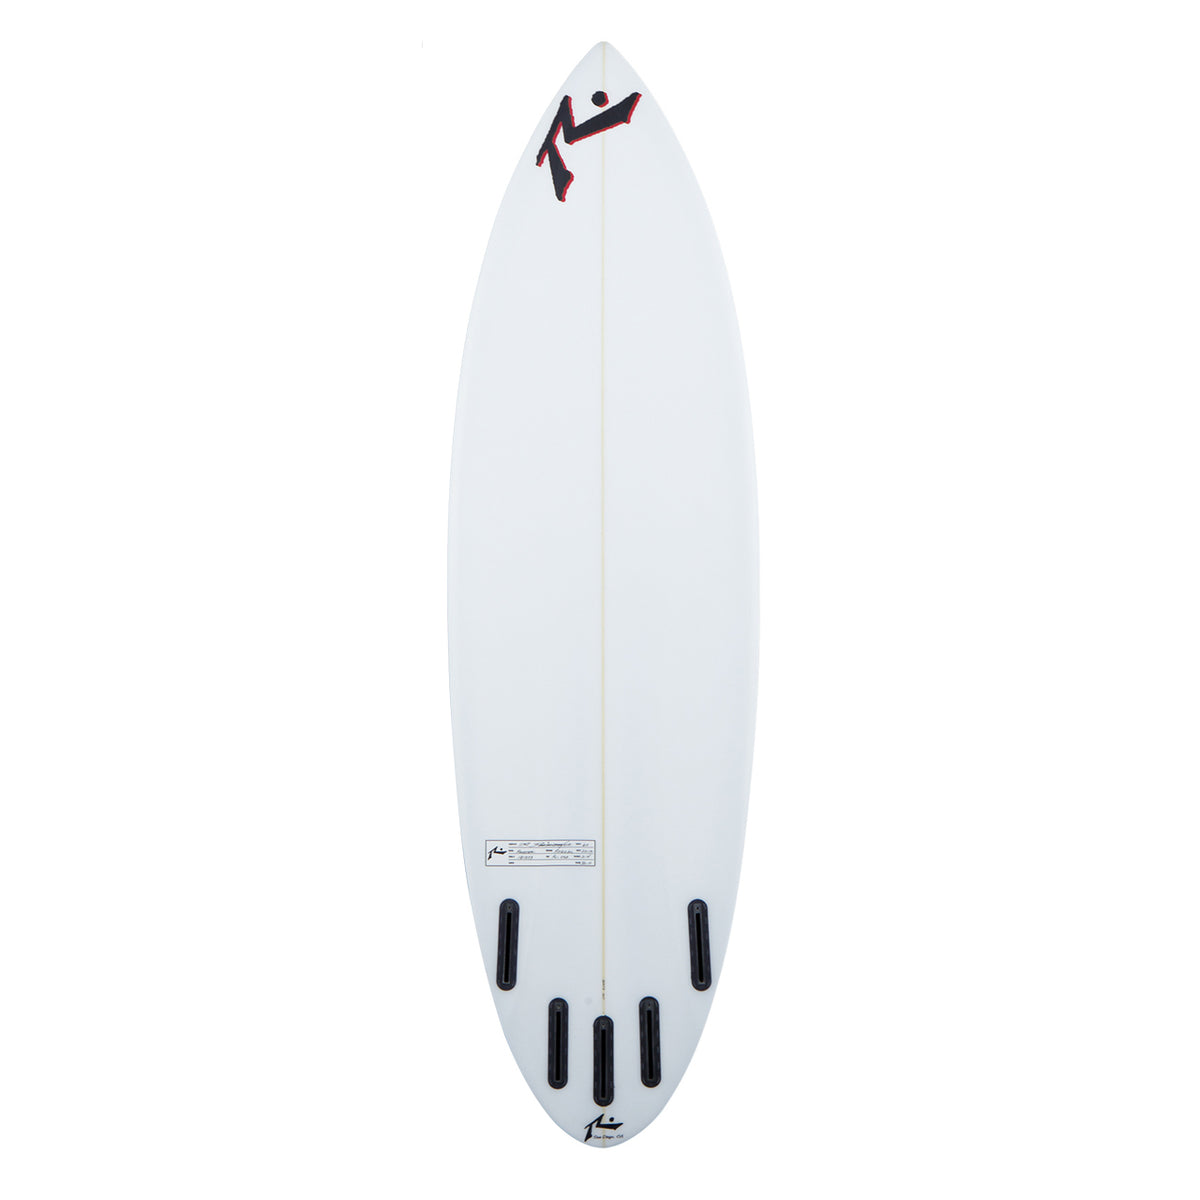 The Rooster - High Performance Shortboard - Rusty Surfboards - Bottom View